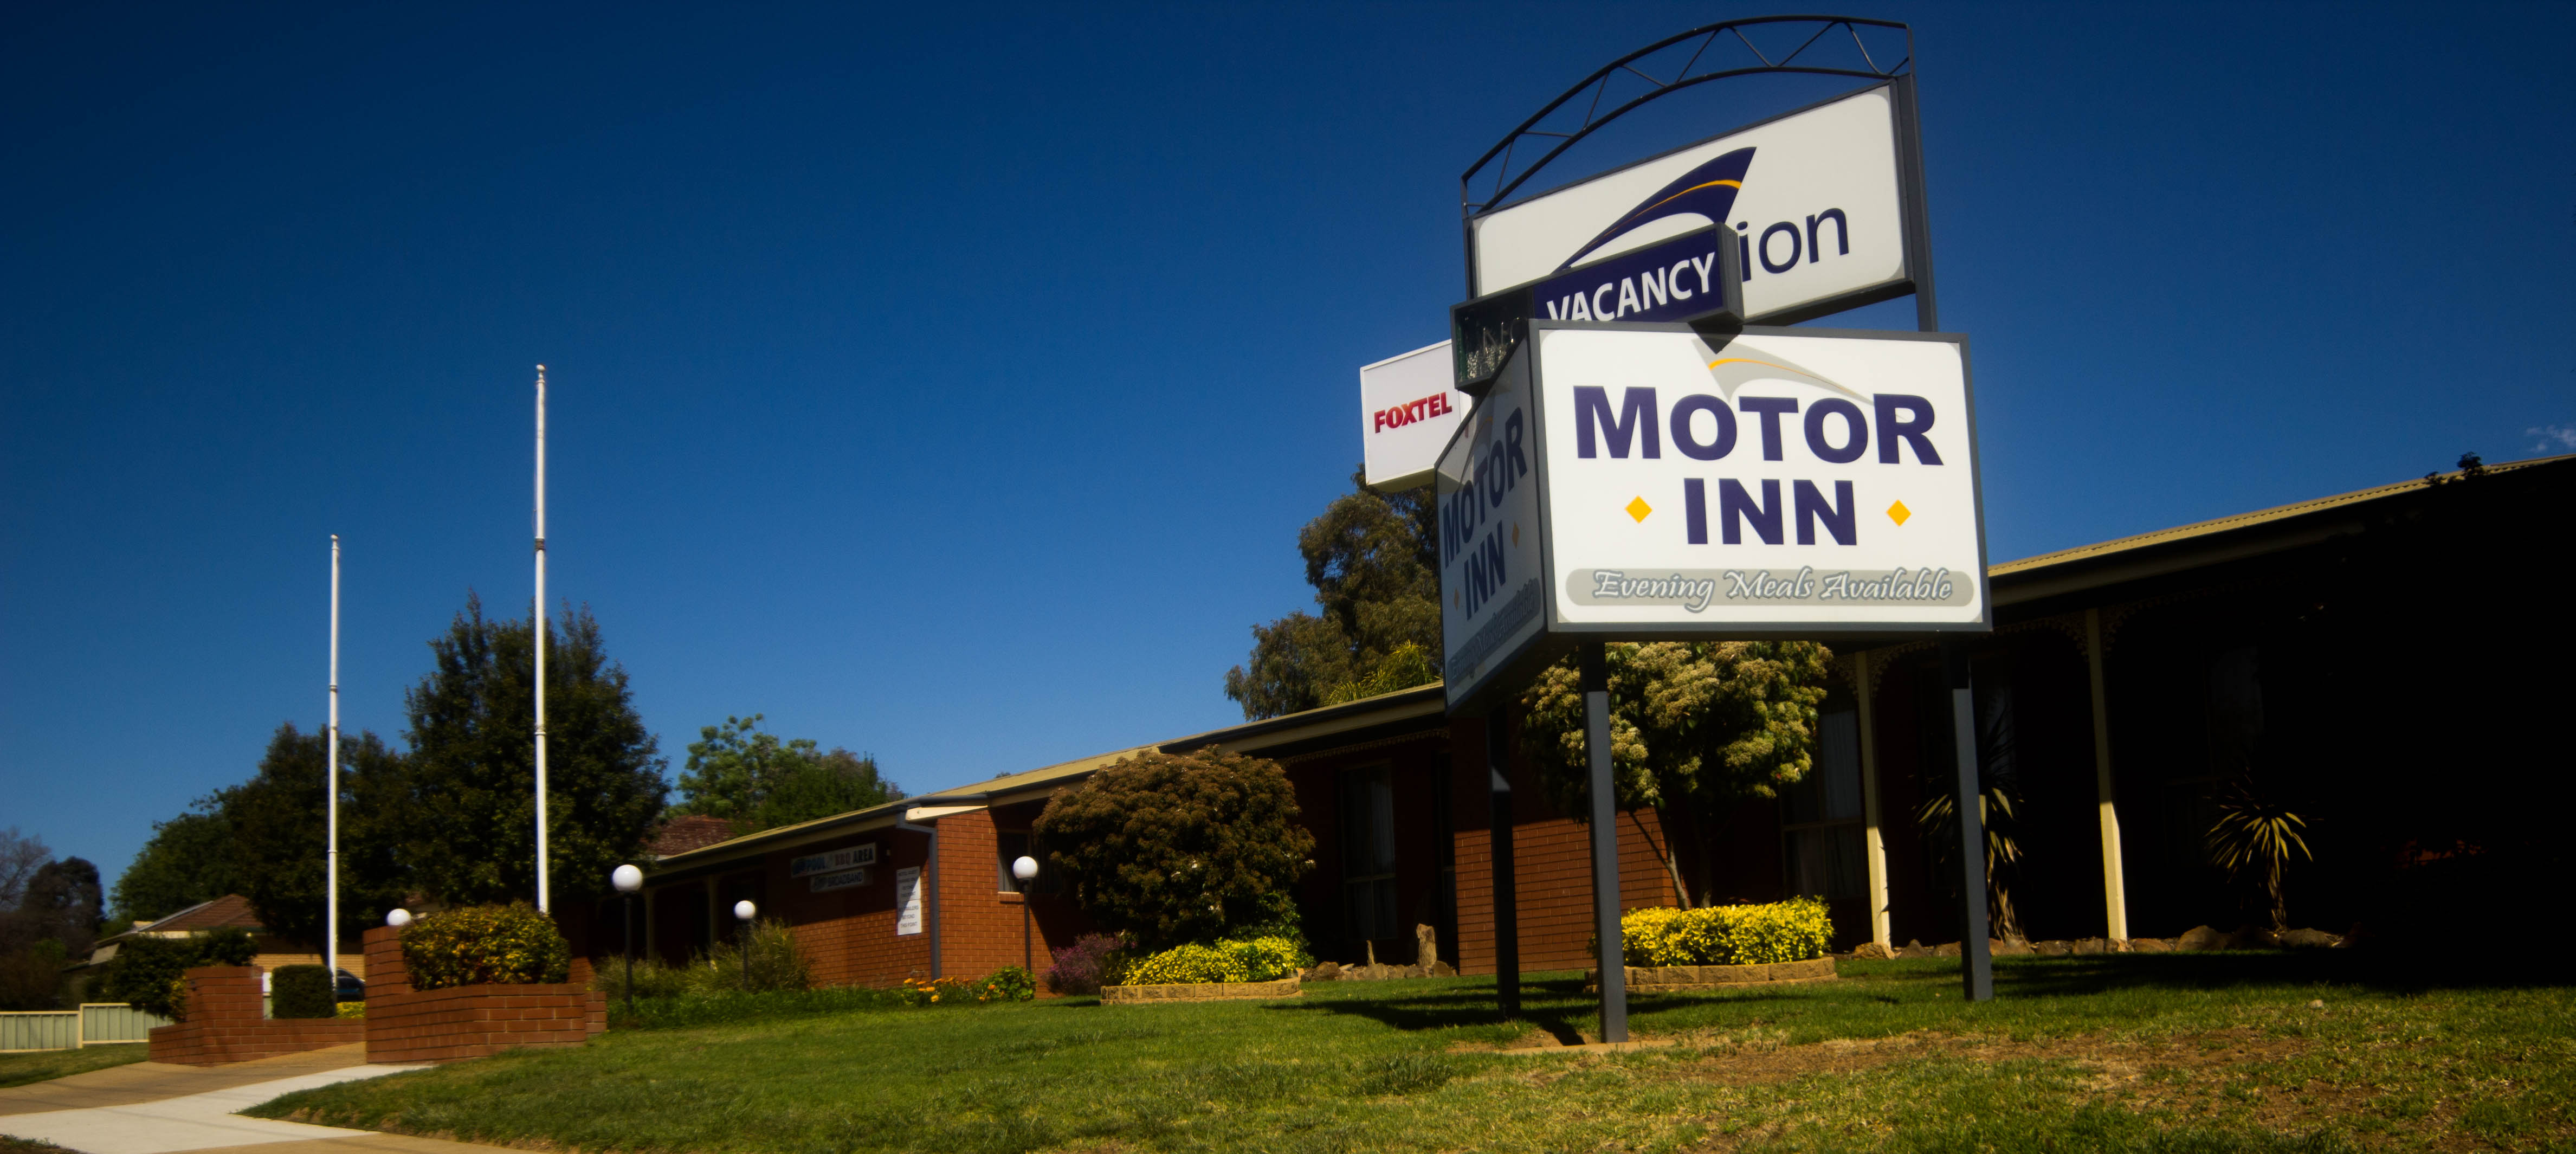 Junction Motor Inn - New South Wales Tourism 